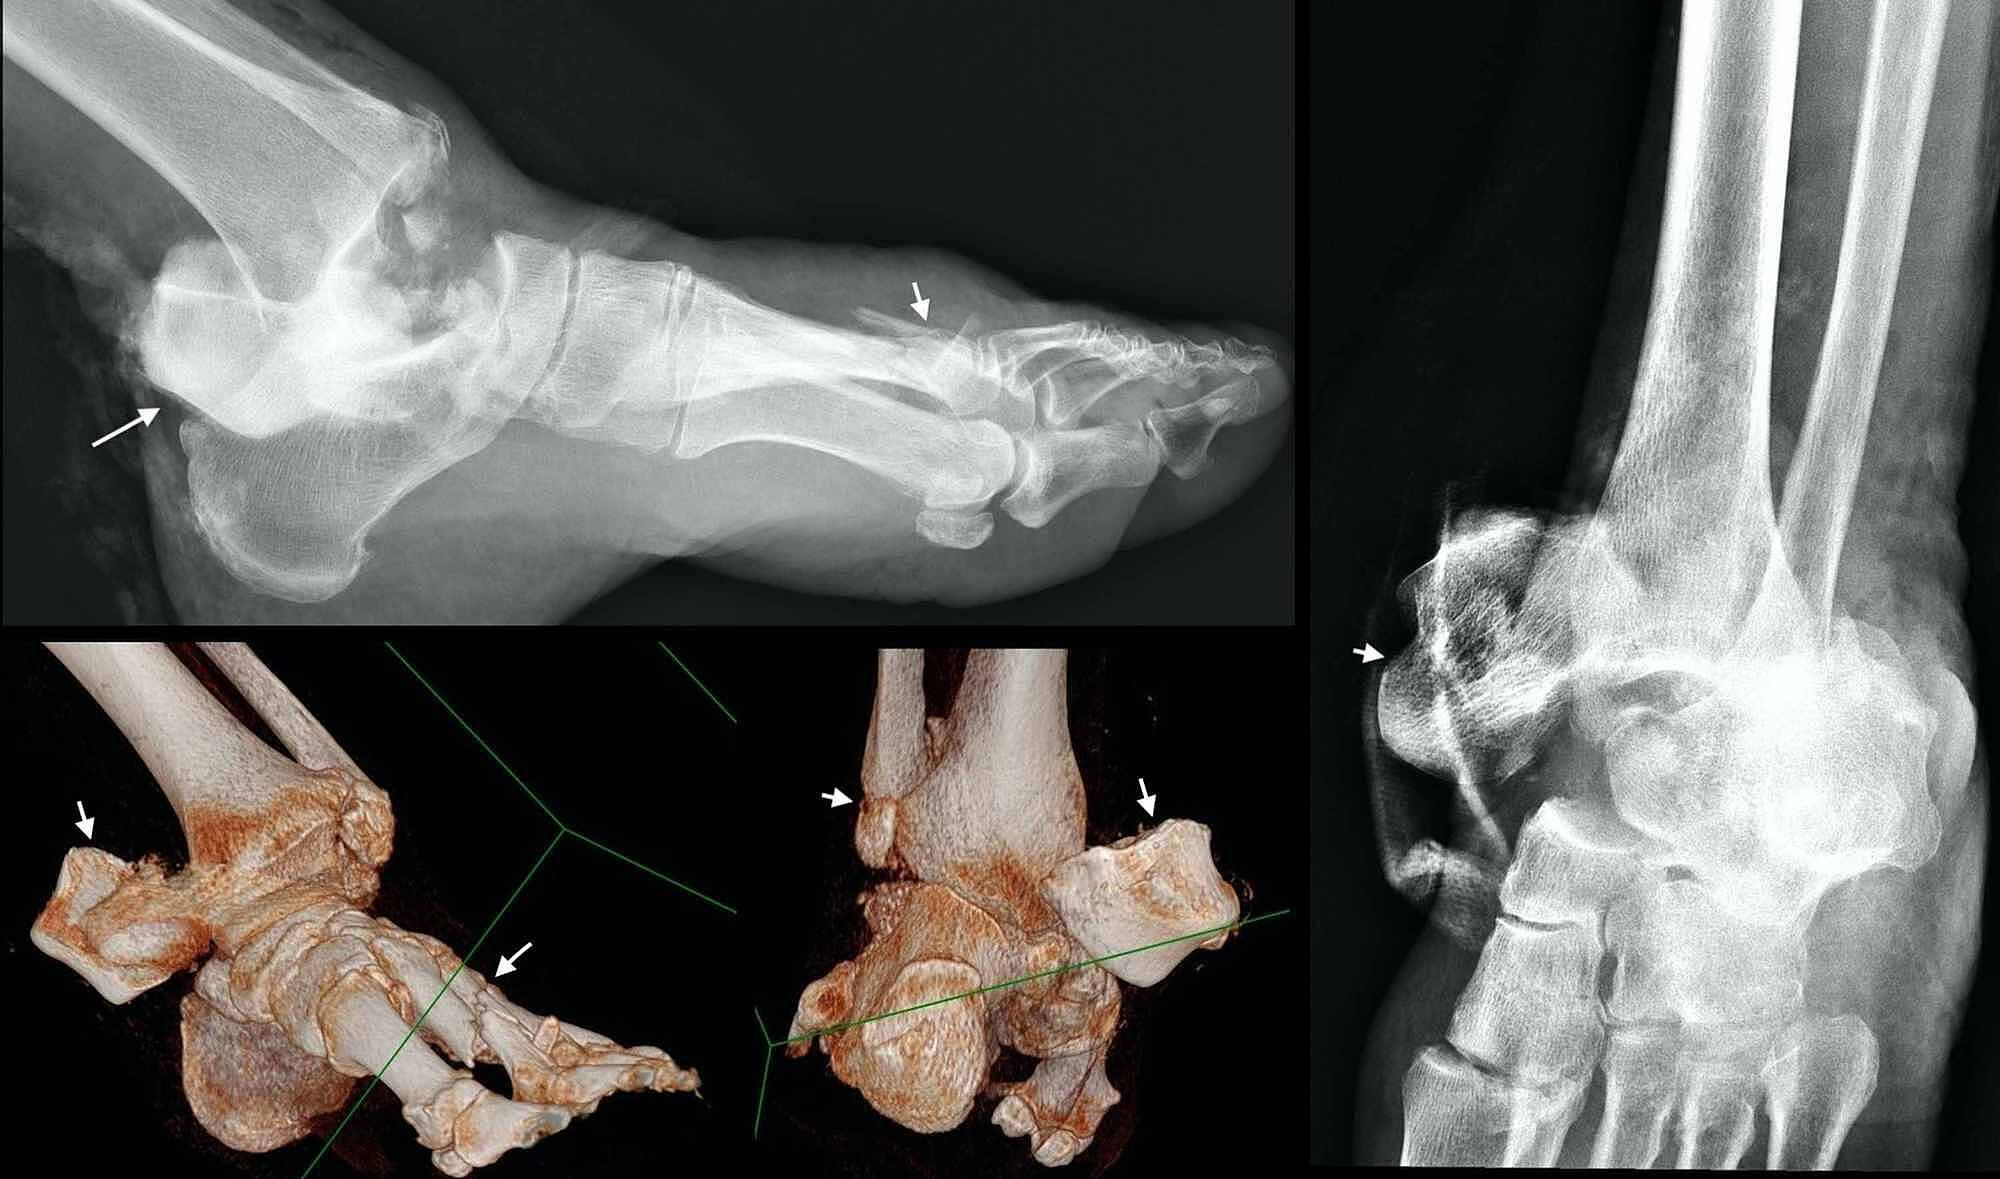 Cureus | Outcomes of a Reimplanted Talus After a Total Open Extrusion